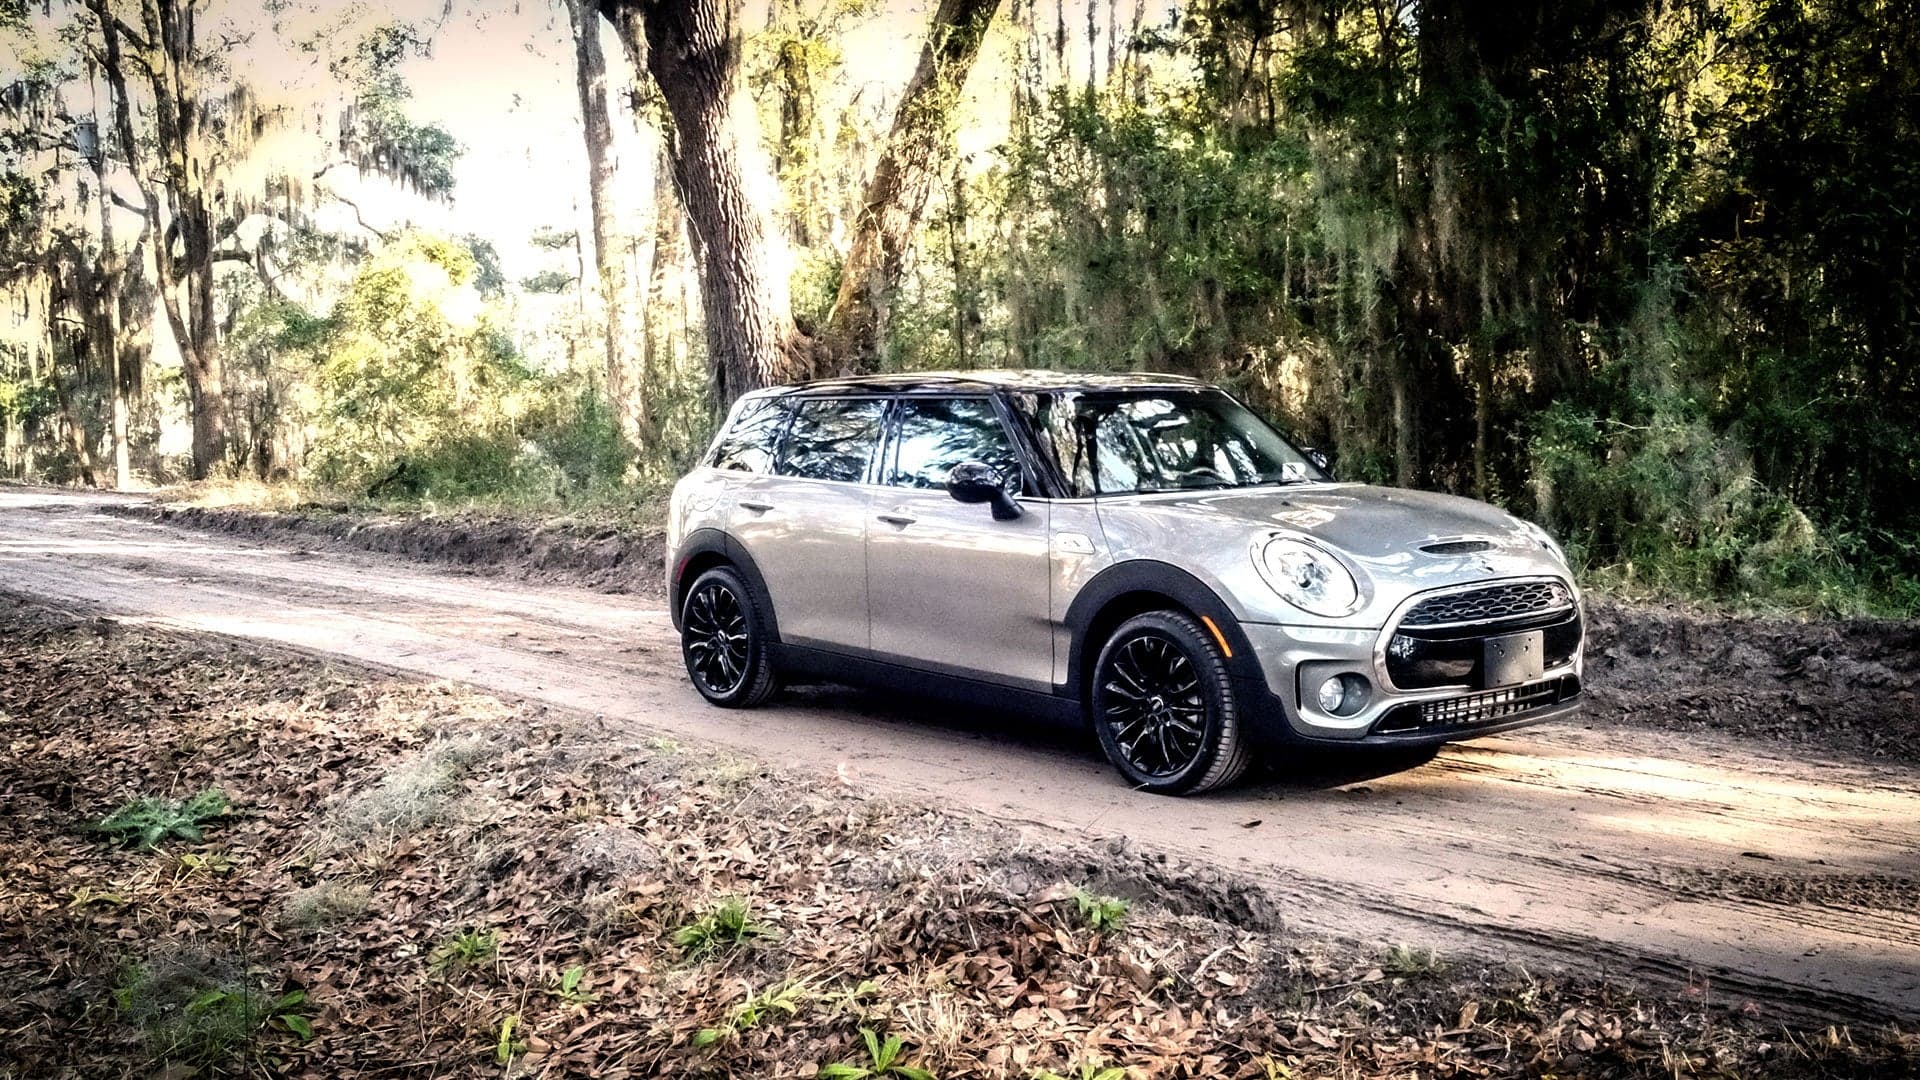 Mini Clubman Is Largest Mini Ever, and One of the Best